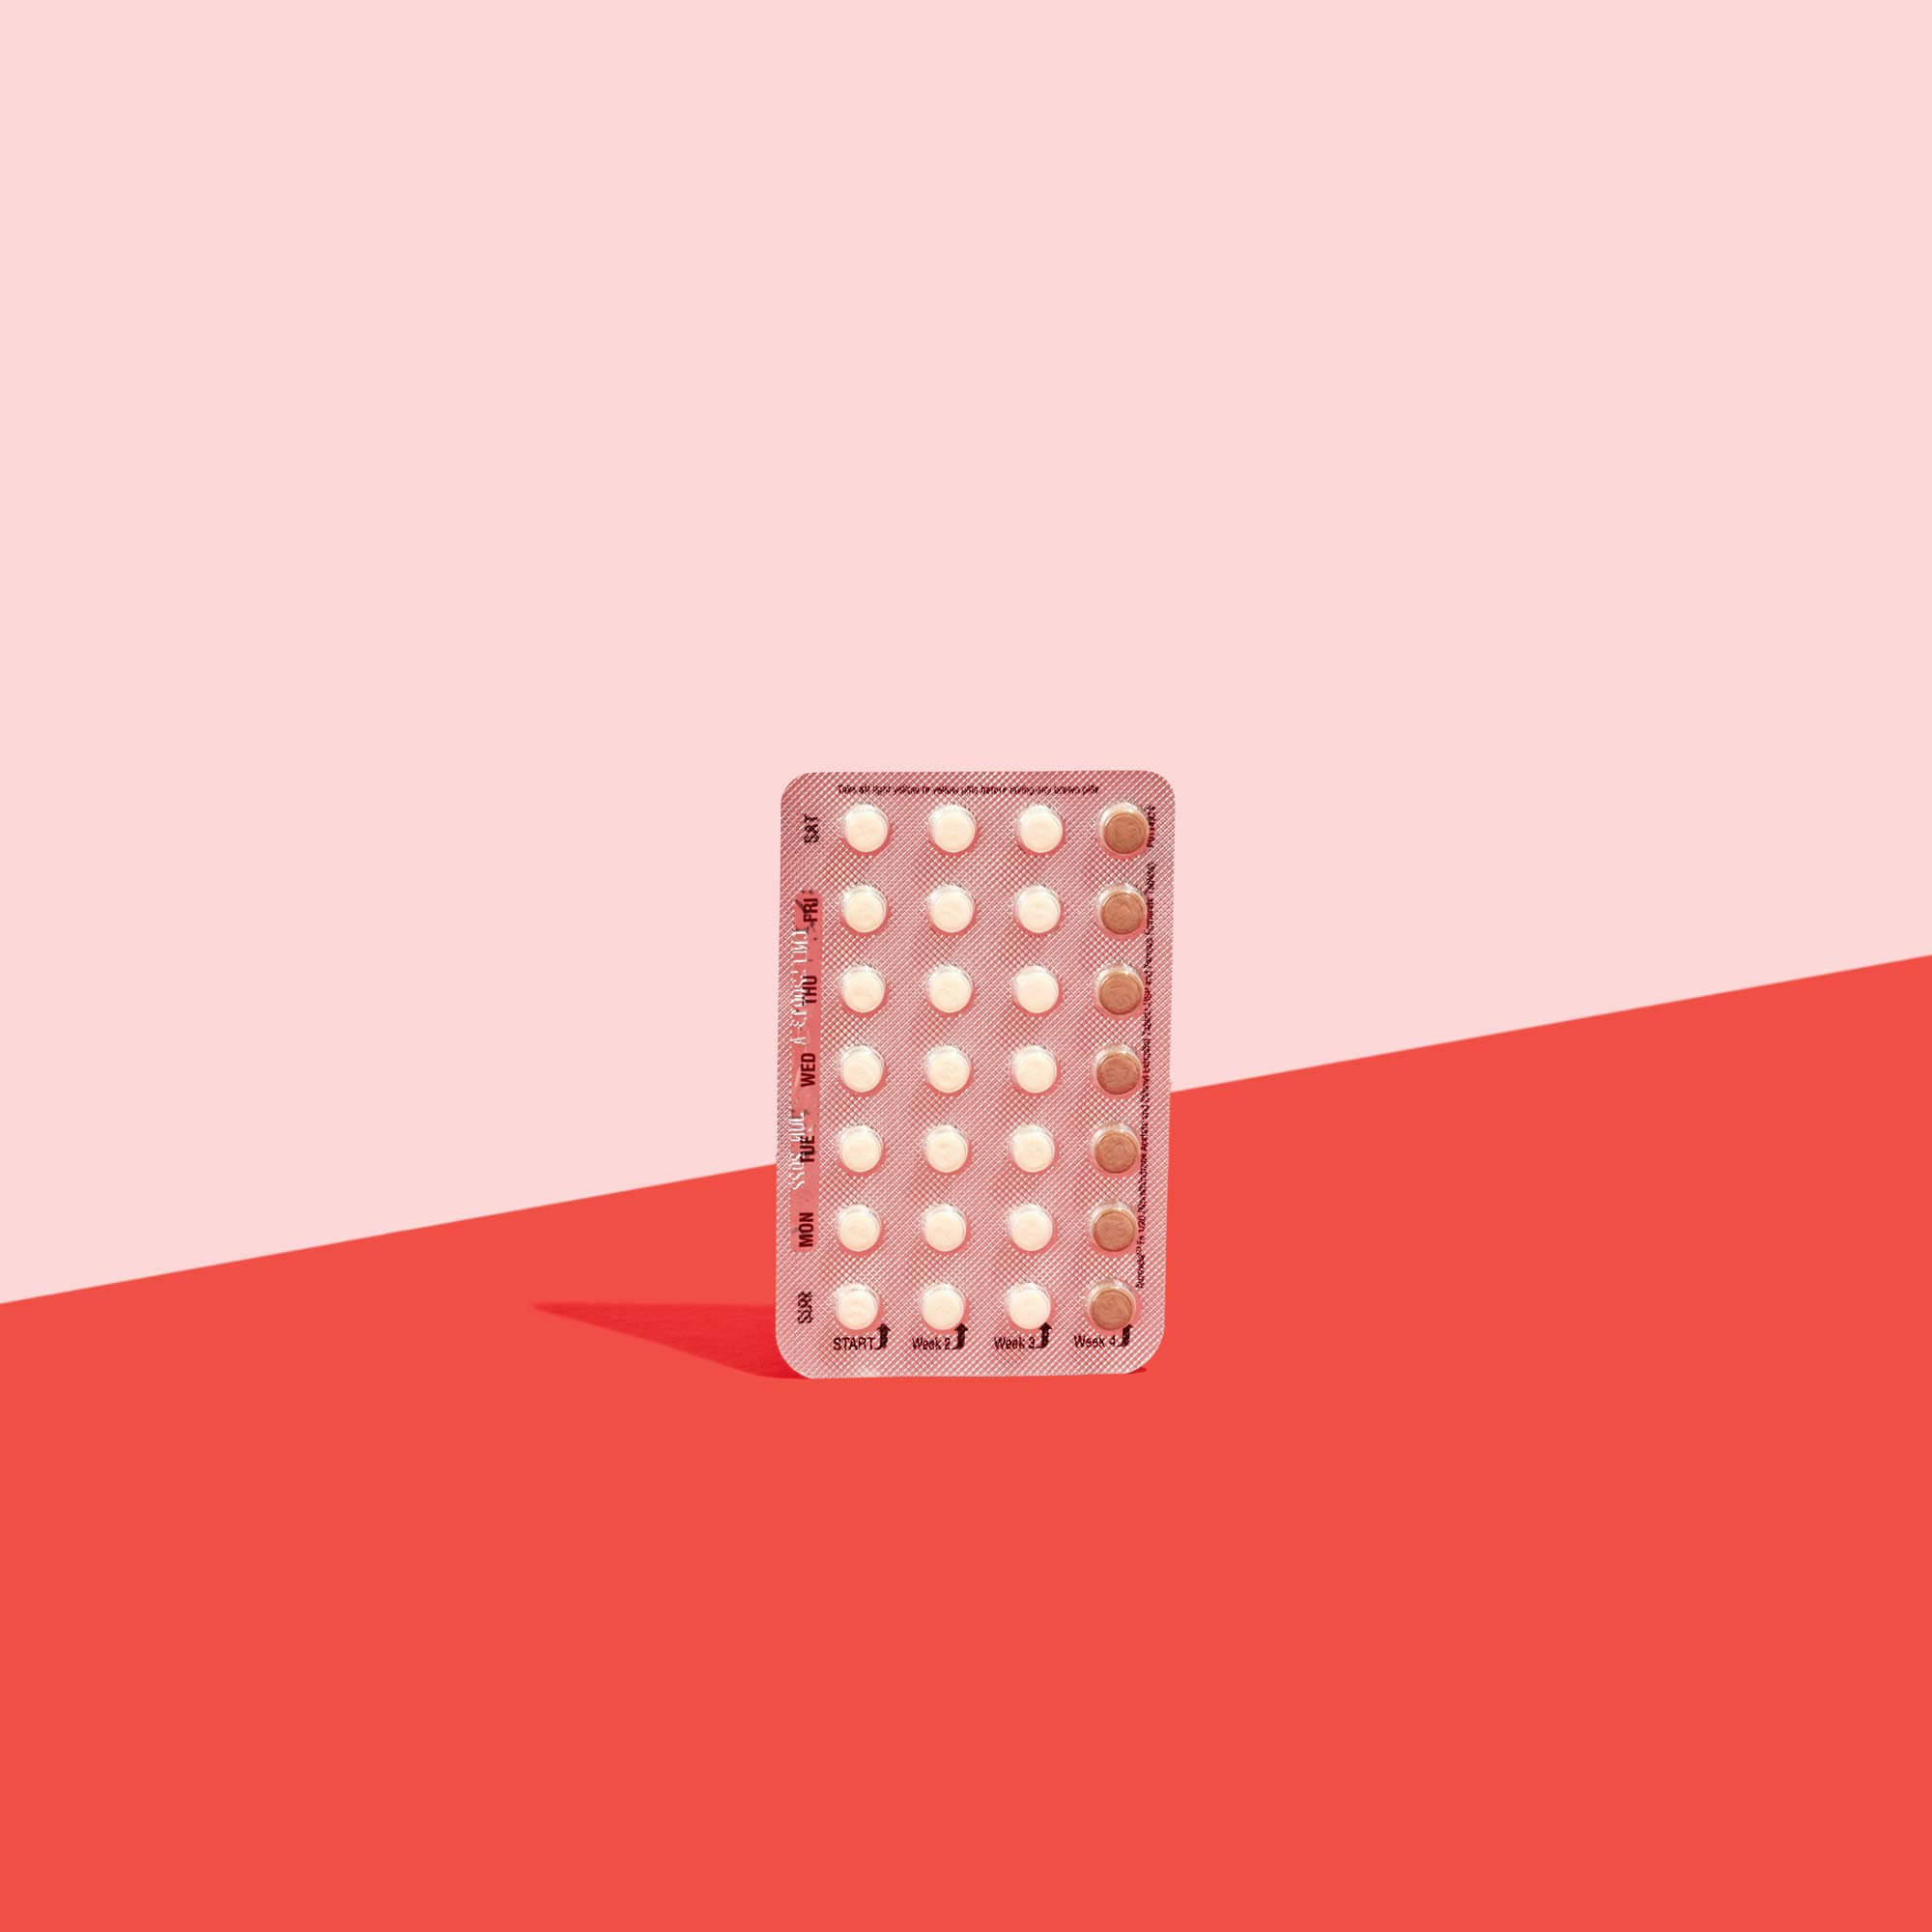 Birth Control packet on a red and pink background